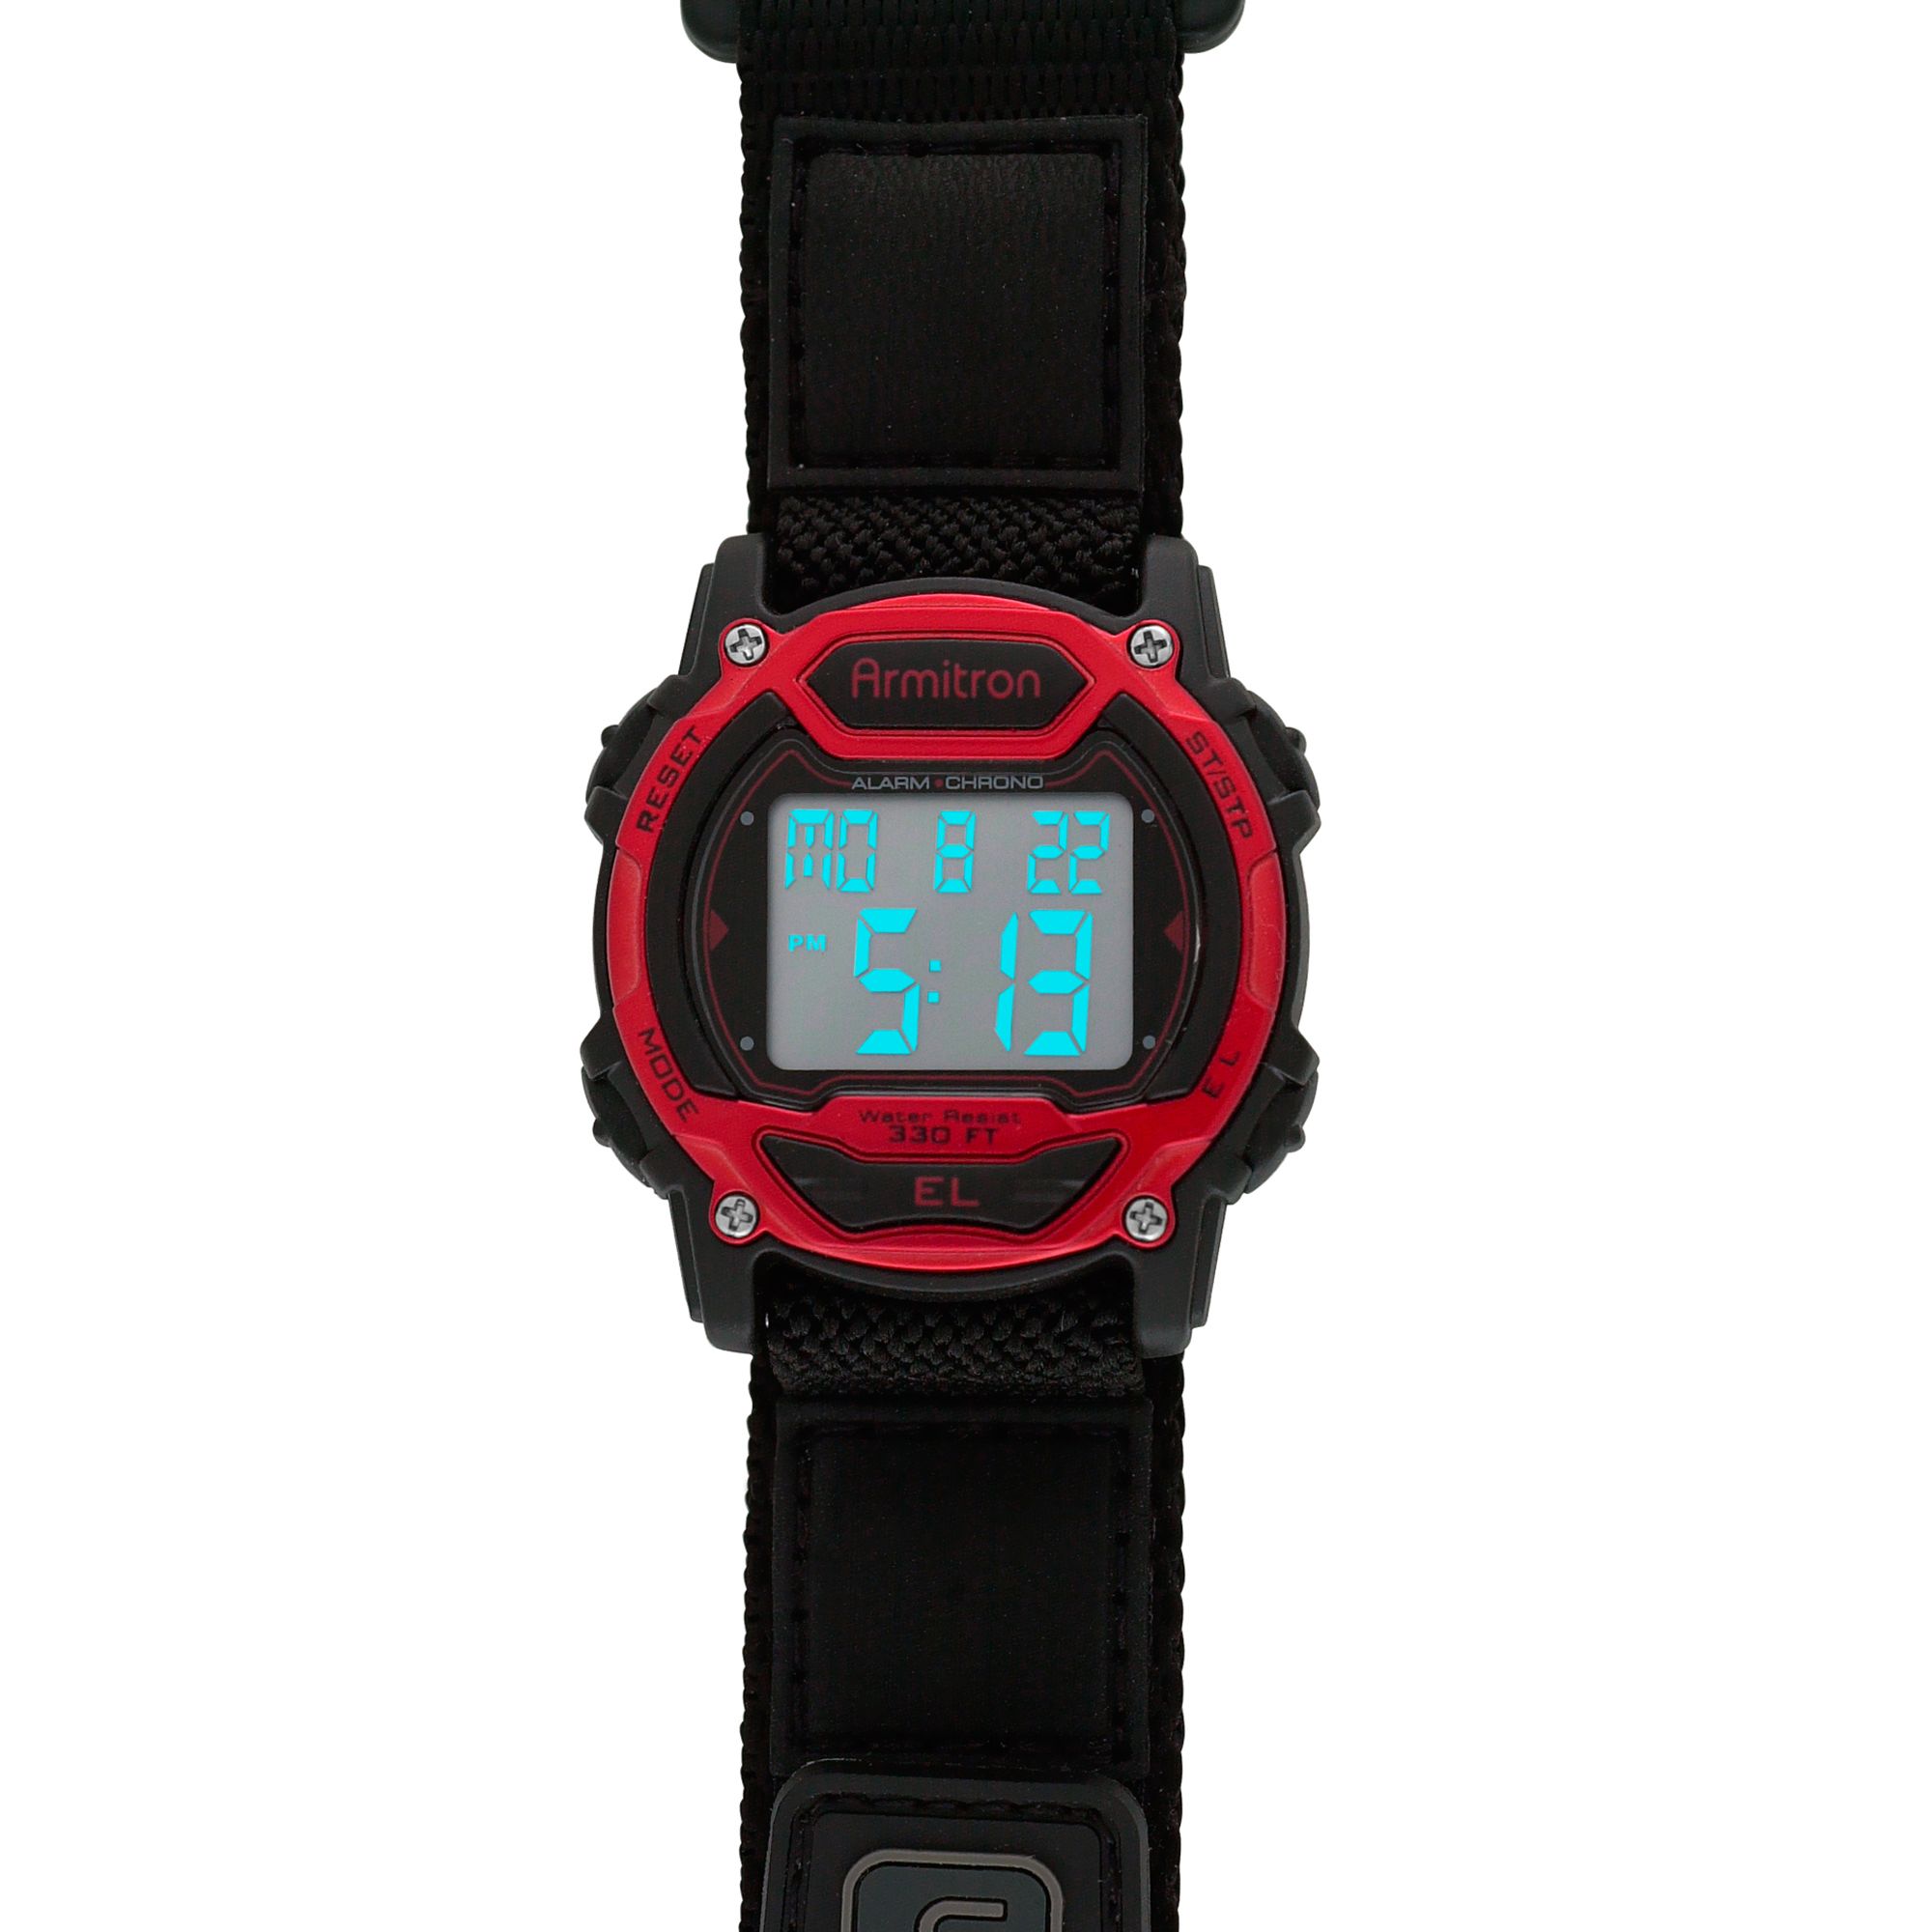 Armitron Ladies Digital Watch with Red/Black Case and Black Fast Wrap Fabric Band